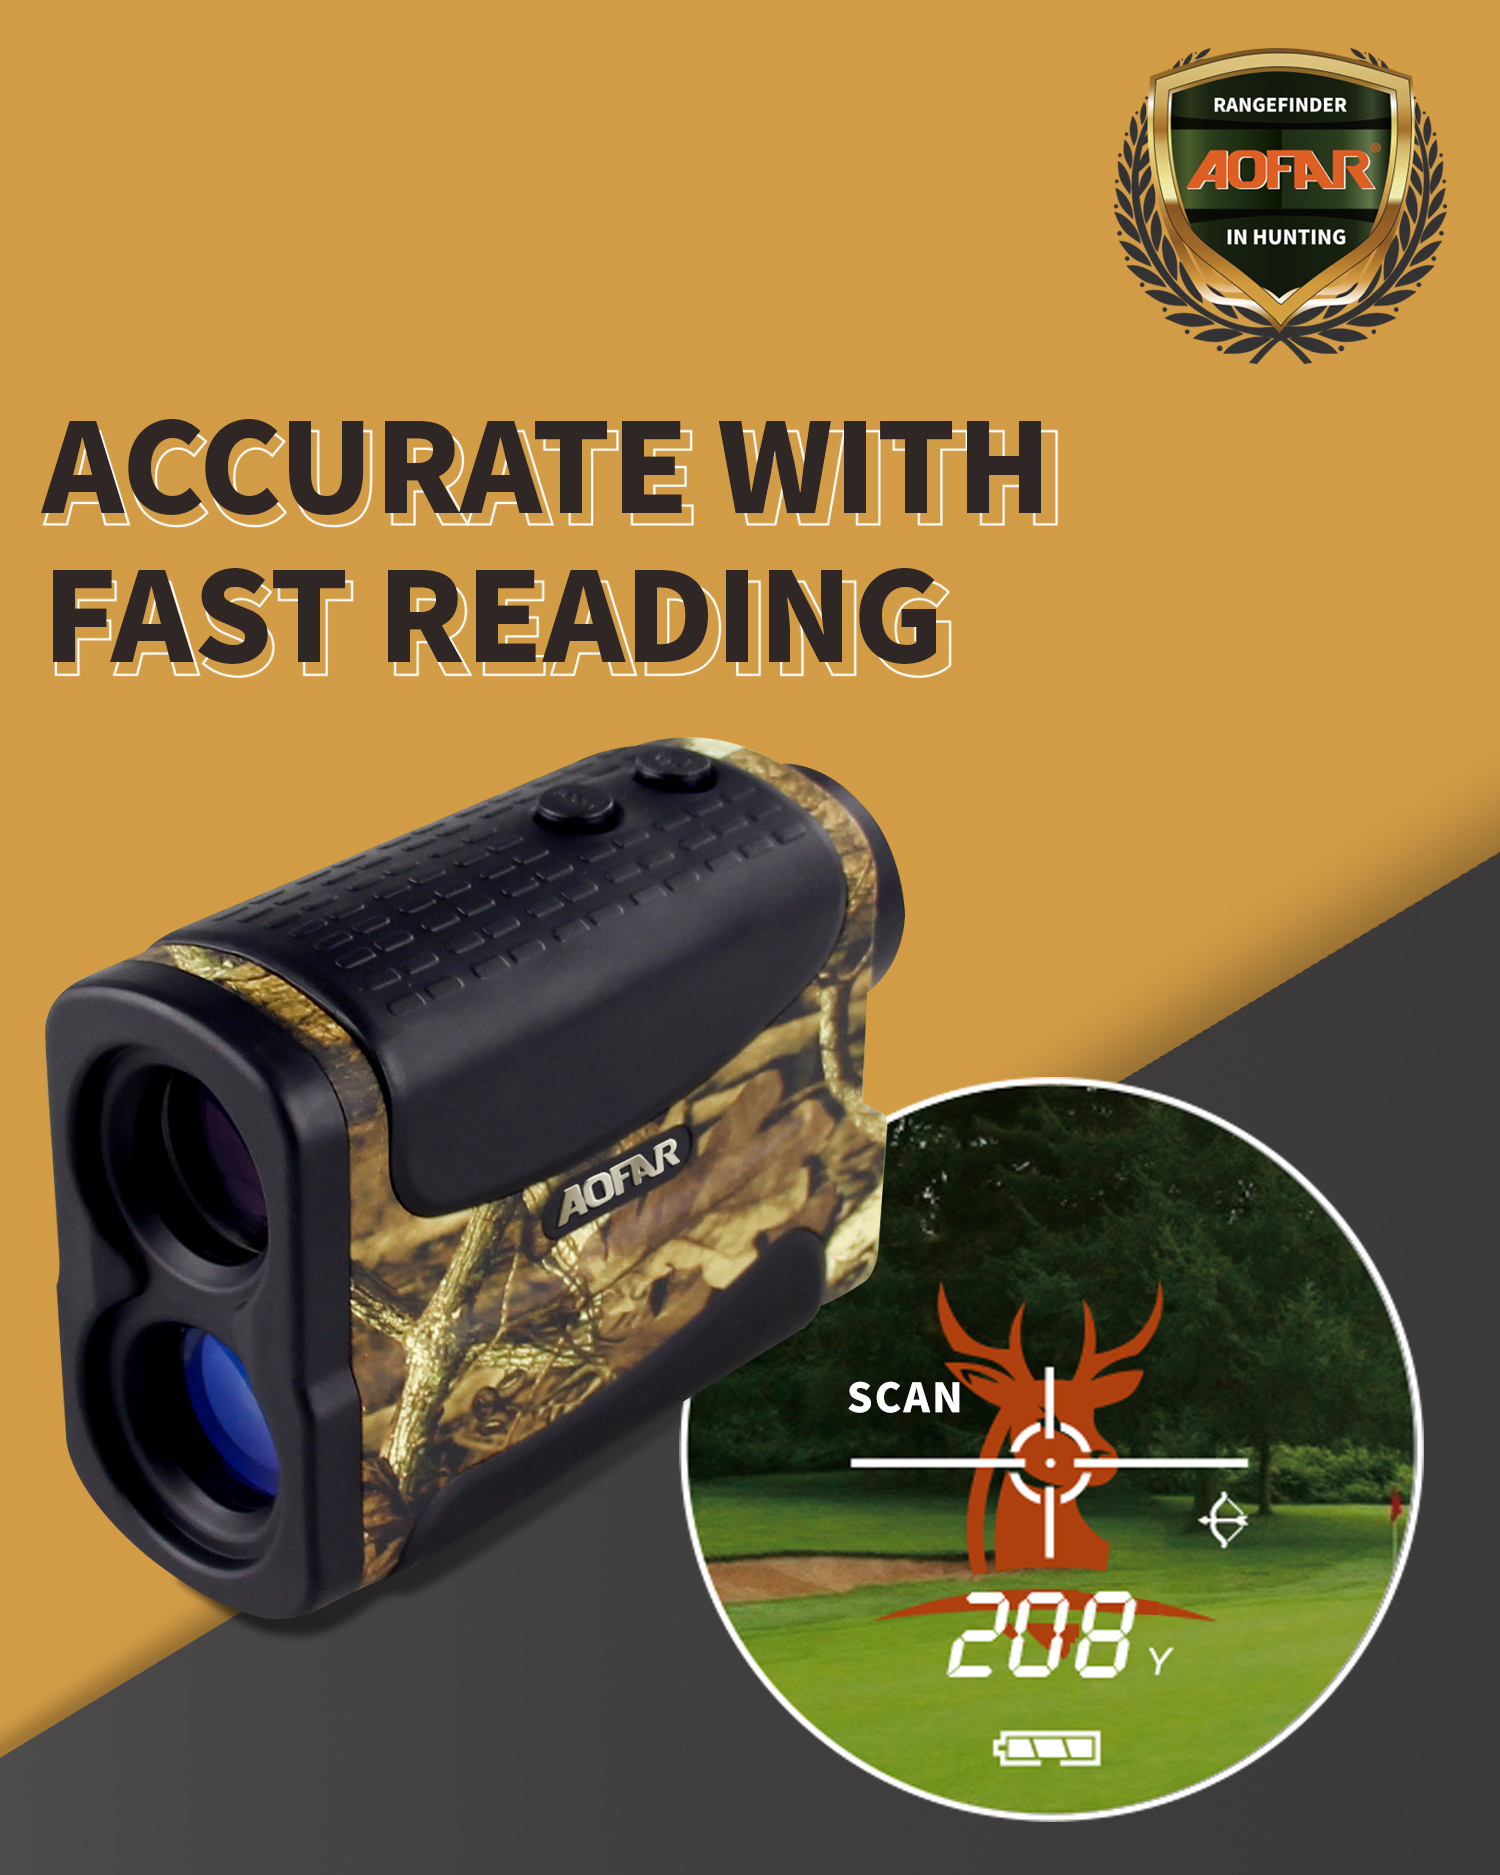 AOFAR Hunting Archery Range Finder HX-700N 700 Yards Waterproof Rangefinder for Bow Hunting with Range Scan Fog and Speed Mode, Free Battery, Carrying Case - image 5 of 6